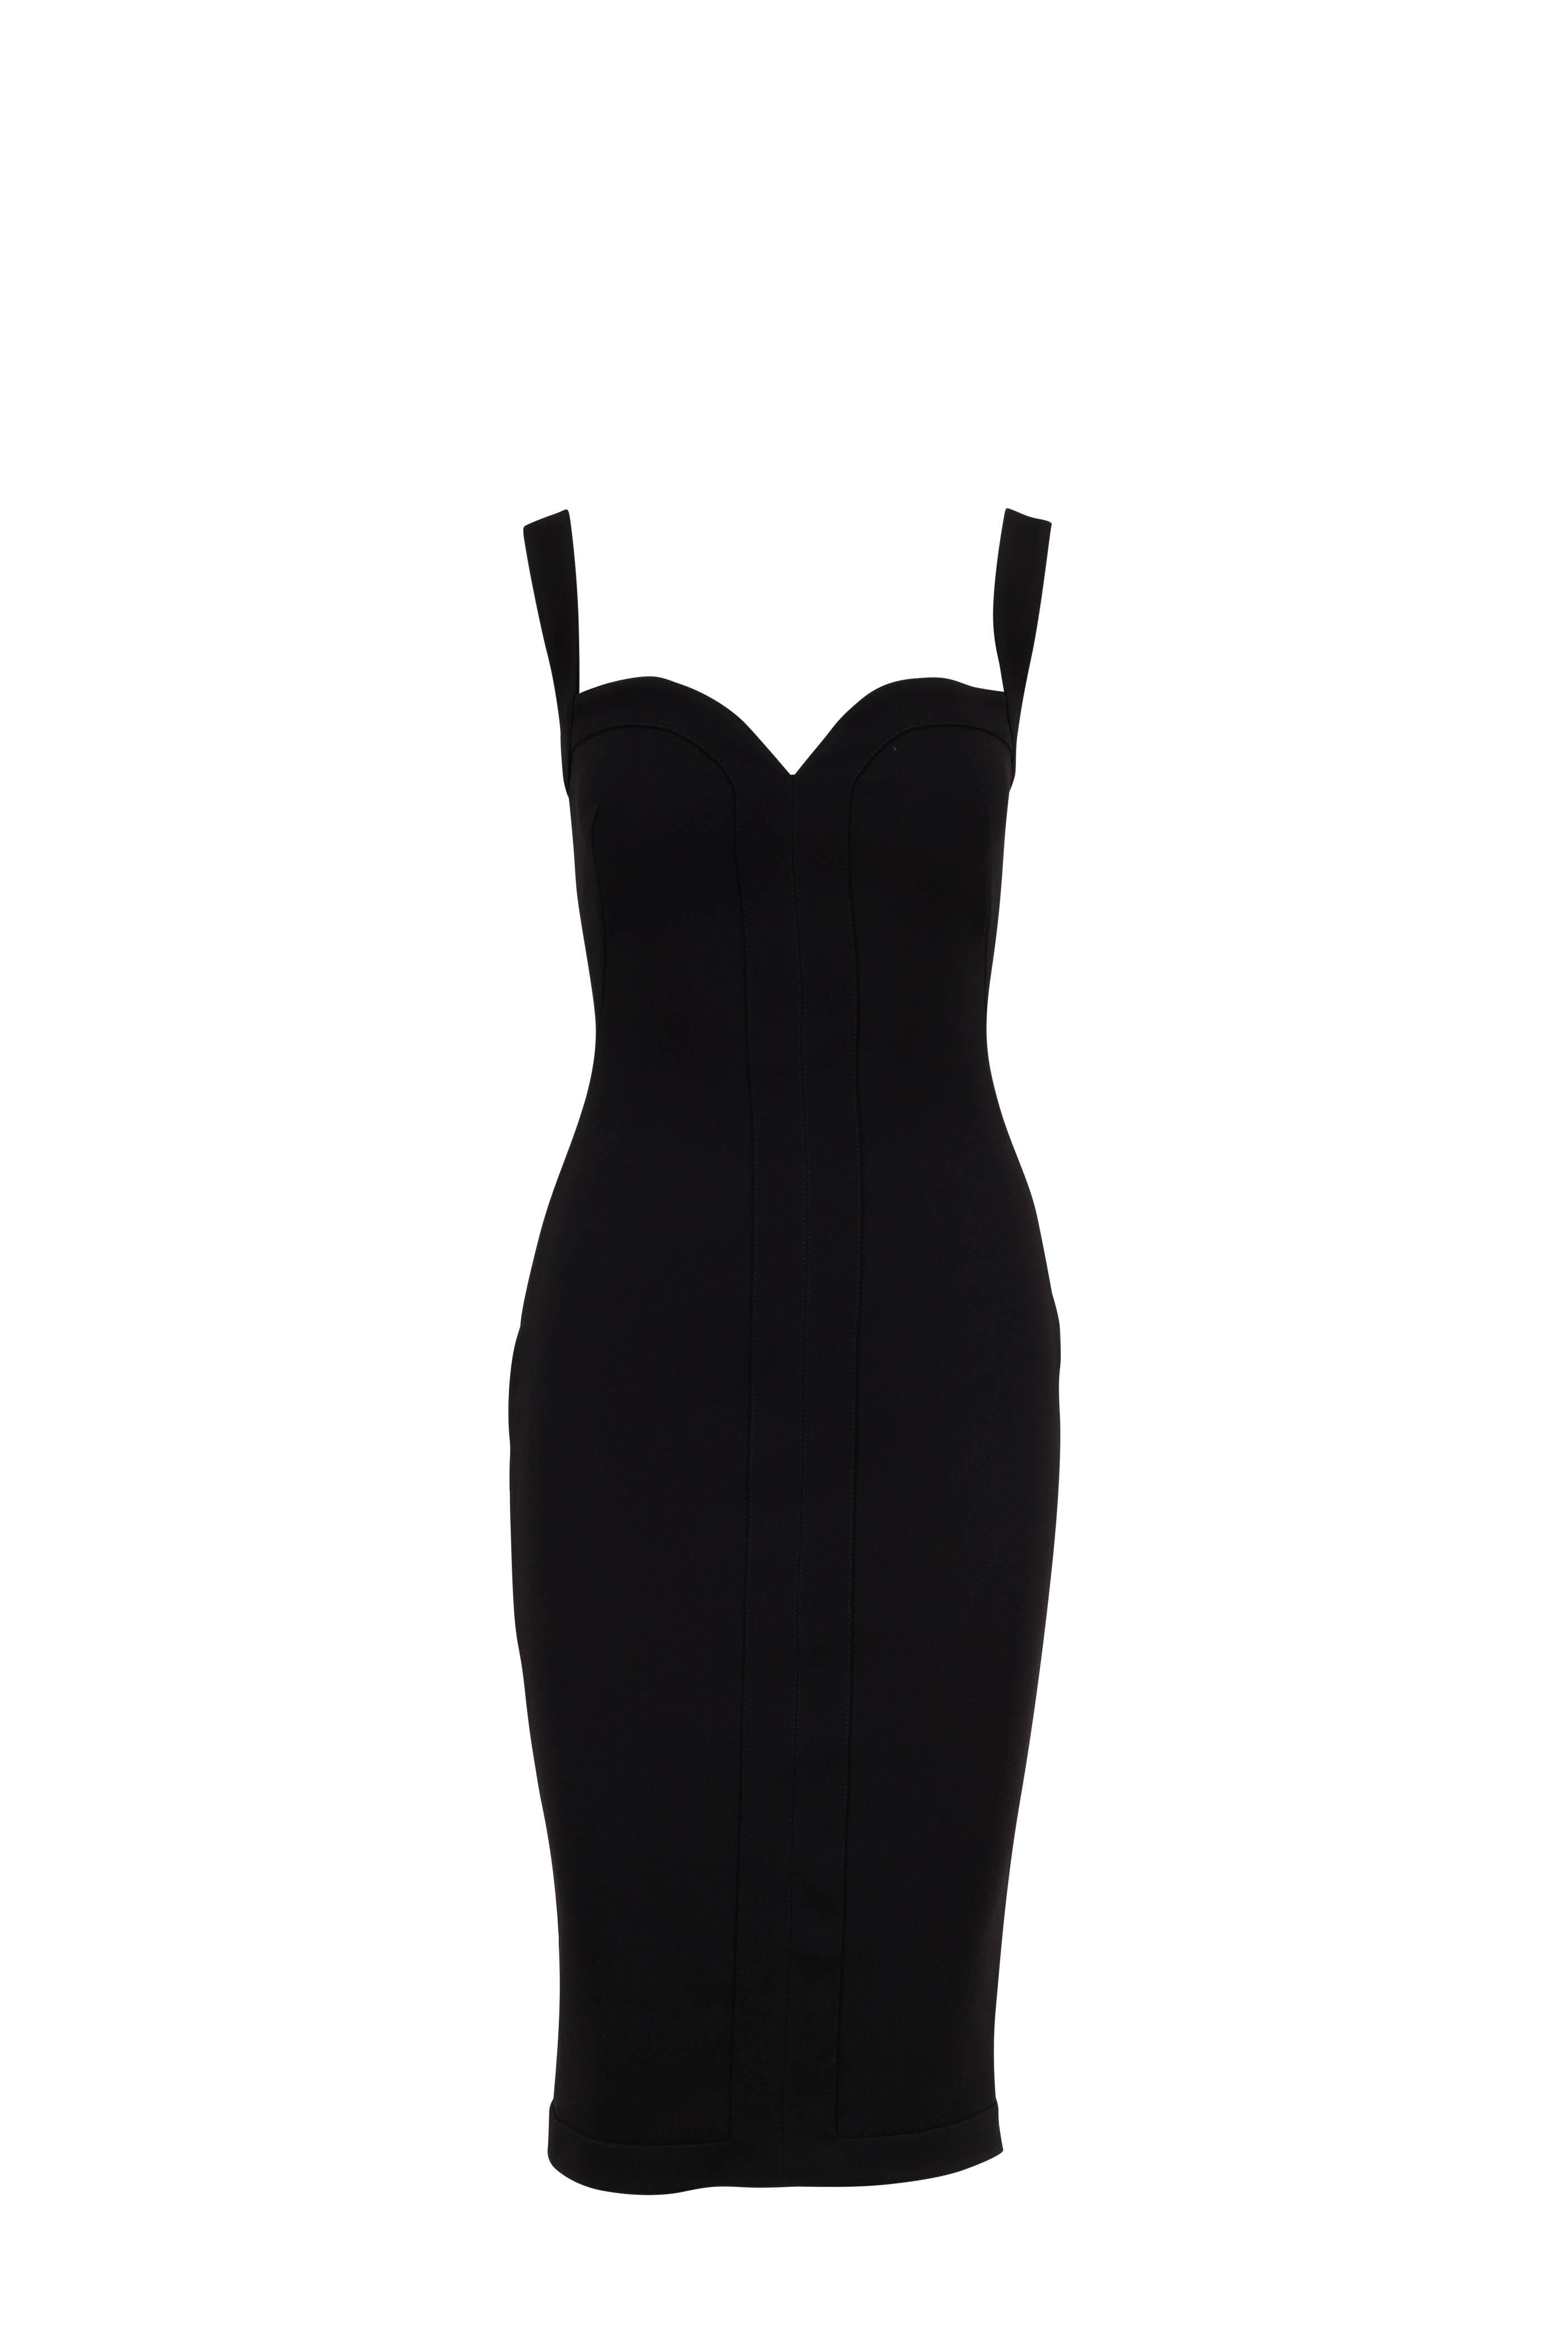 black dresses in stores near me